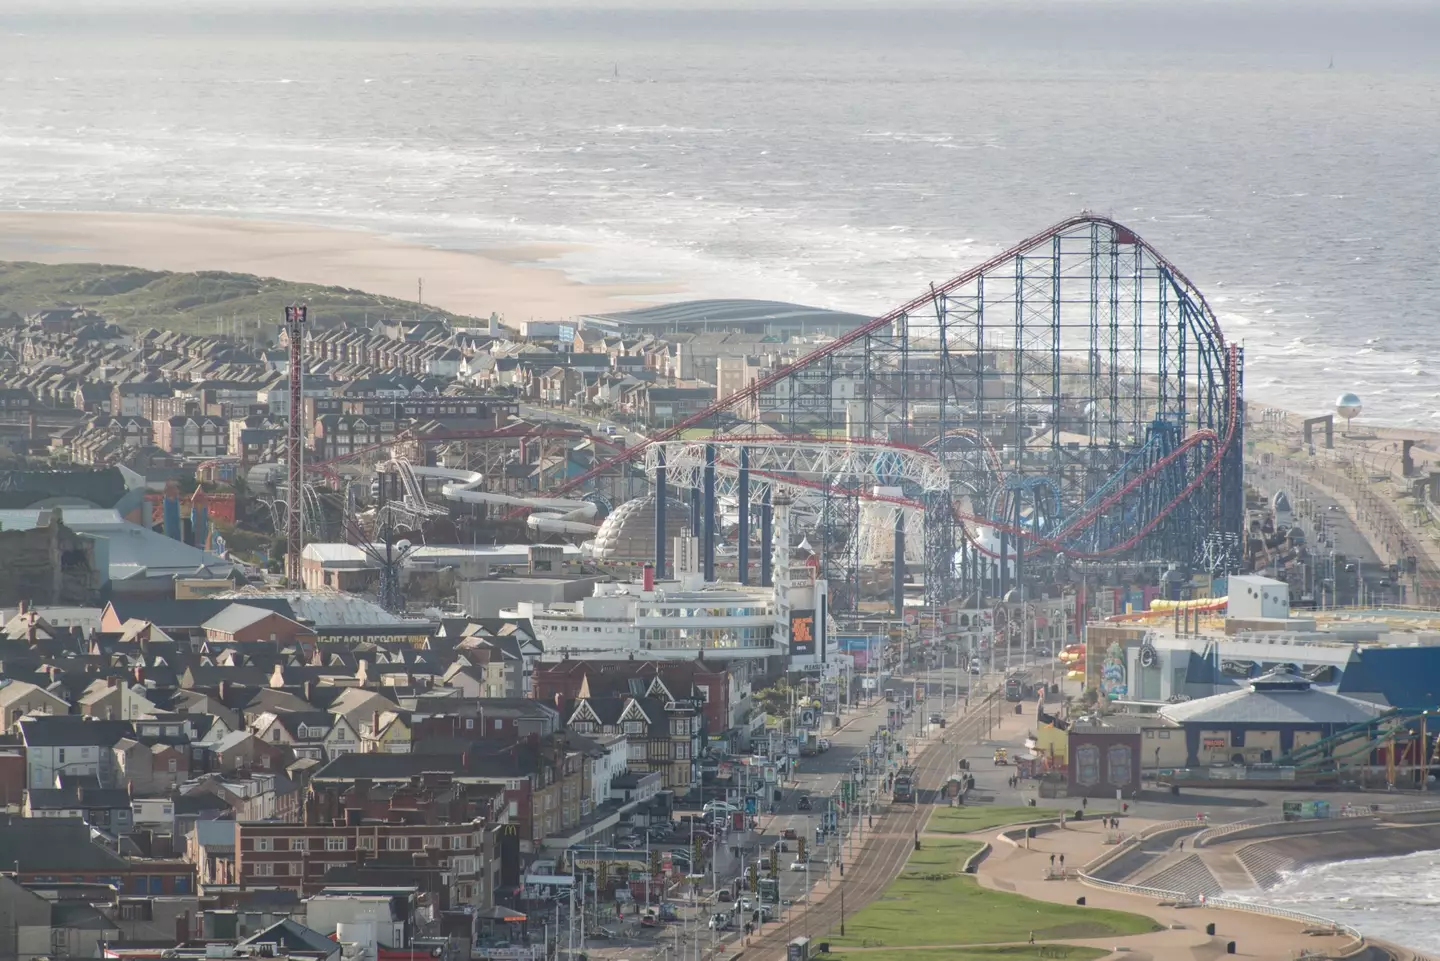 Blackpool has been compared to Chernobyl.